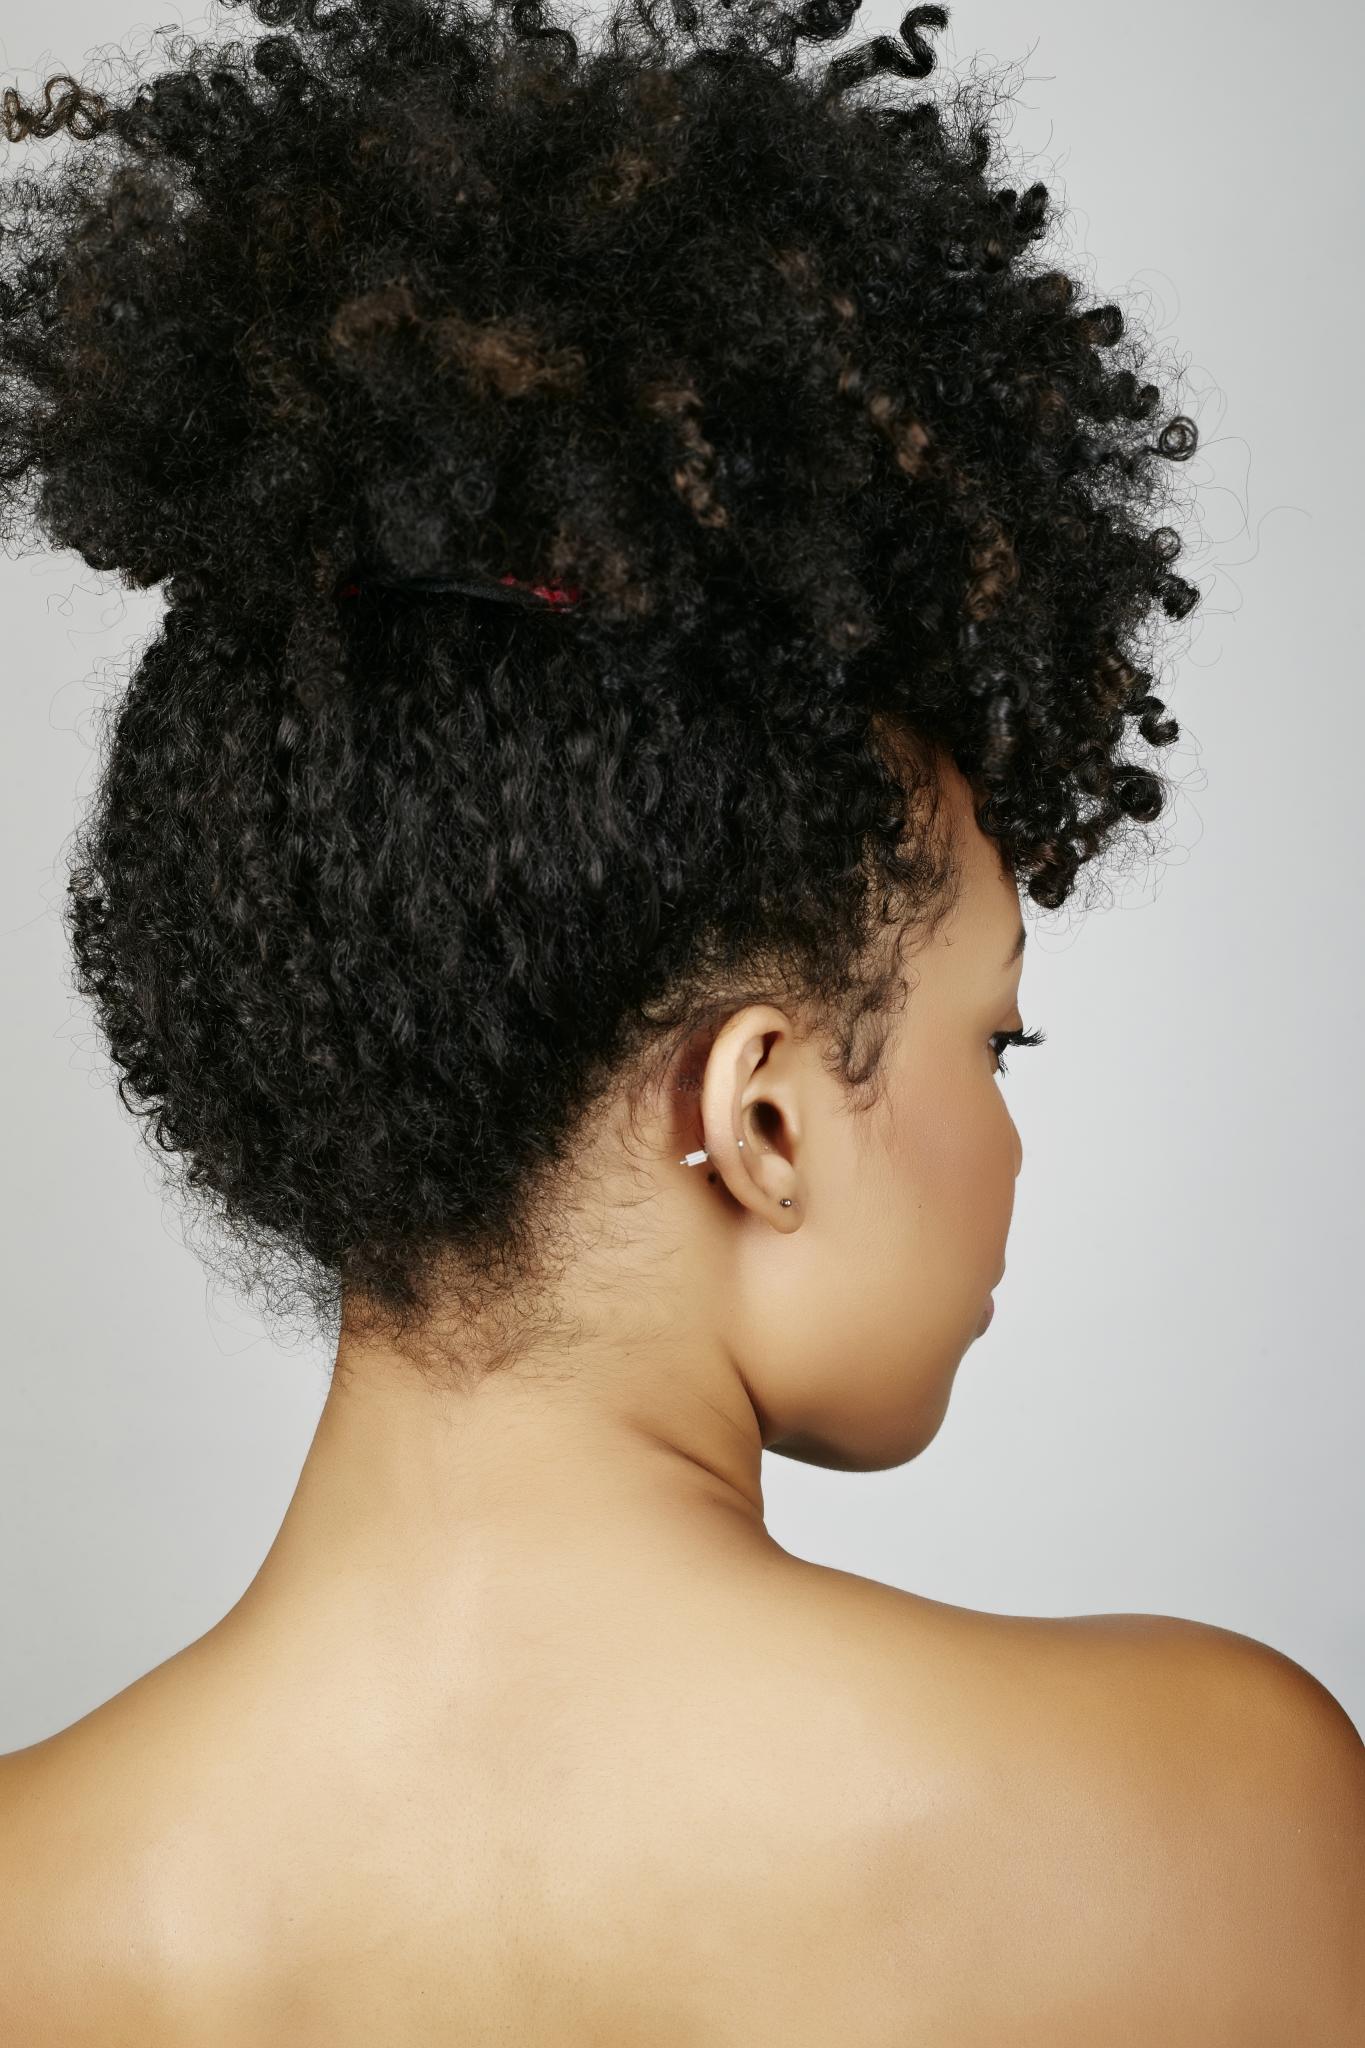 Ask The Experts: When is it Okay to Use Sulfates on Your Curls? - Essence